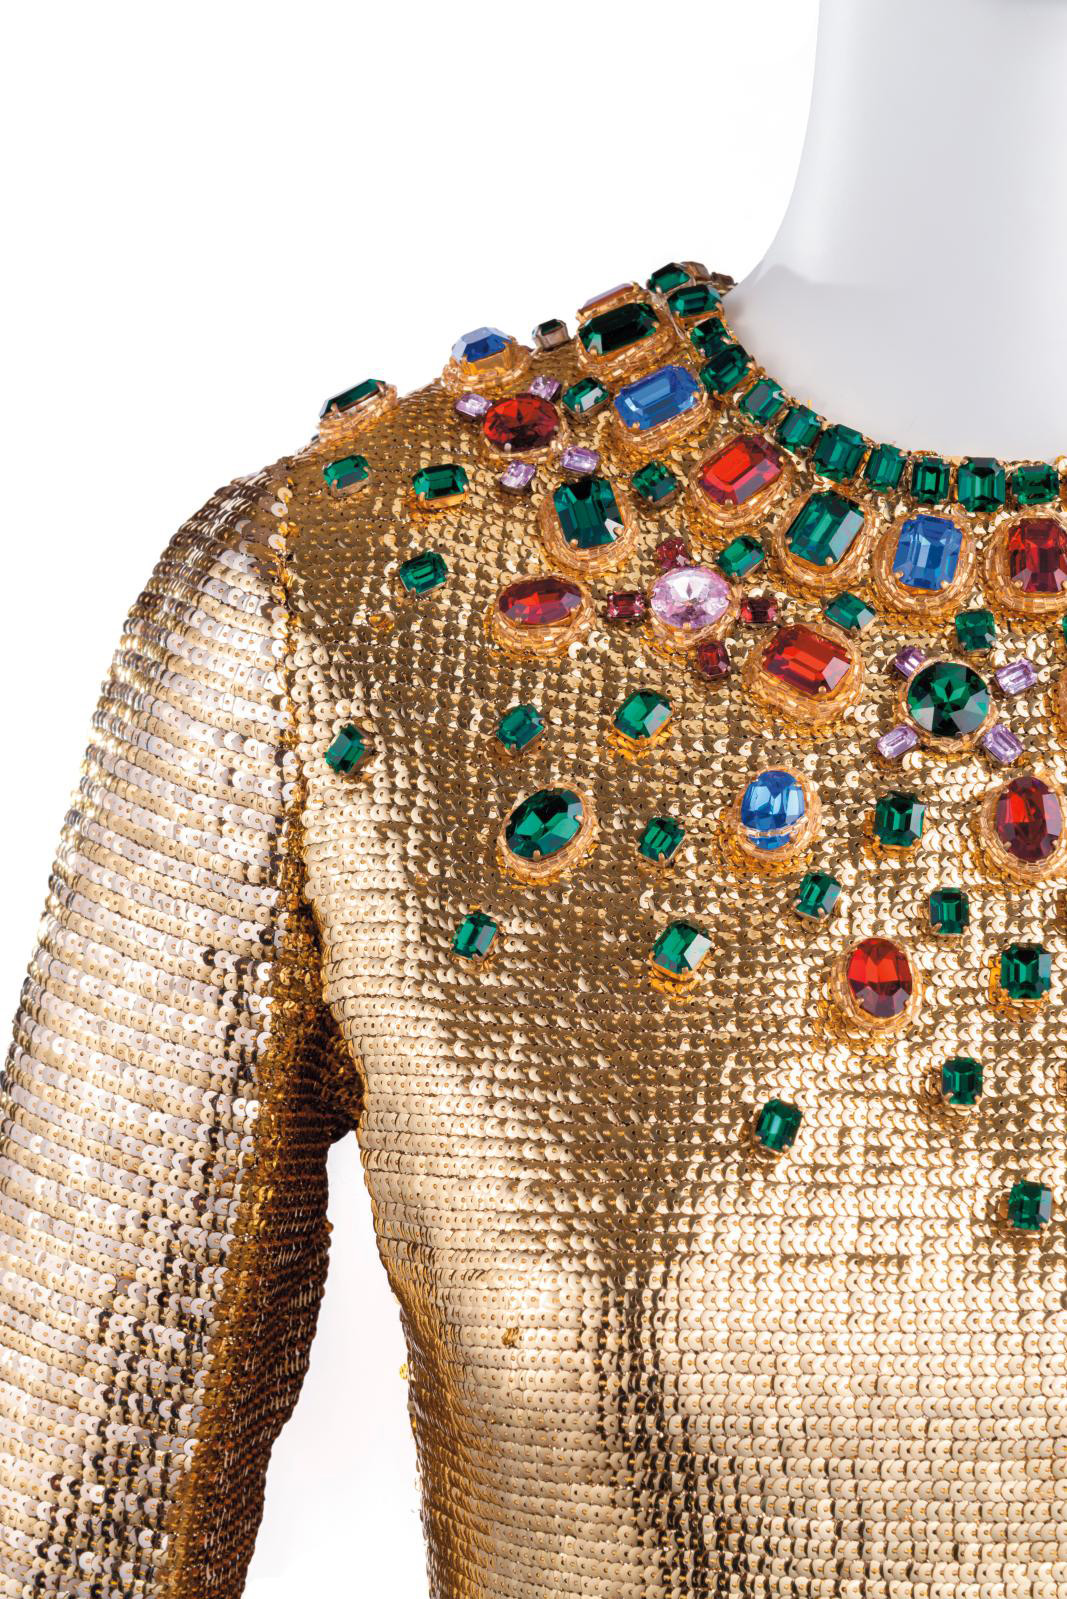 Fashion Gold at the Yves Saint Laurent Museum in Paris 